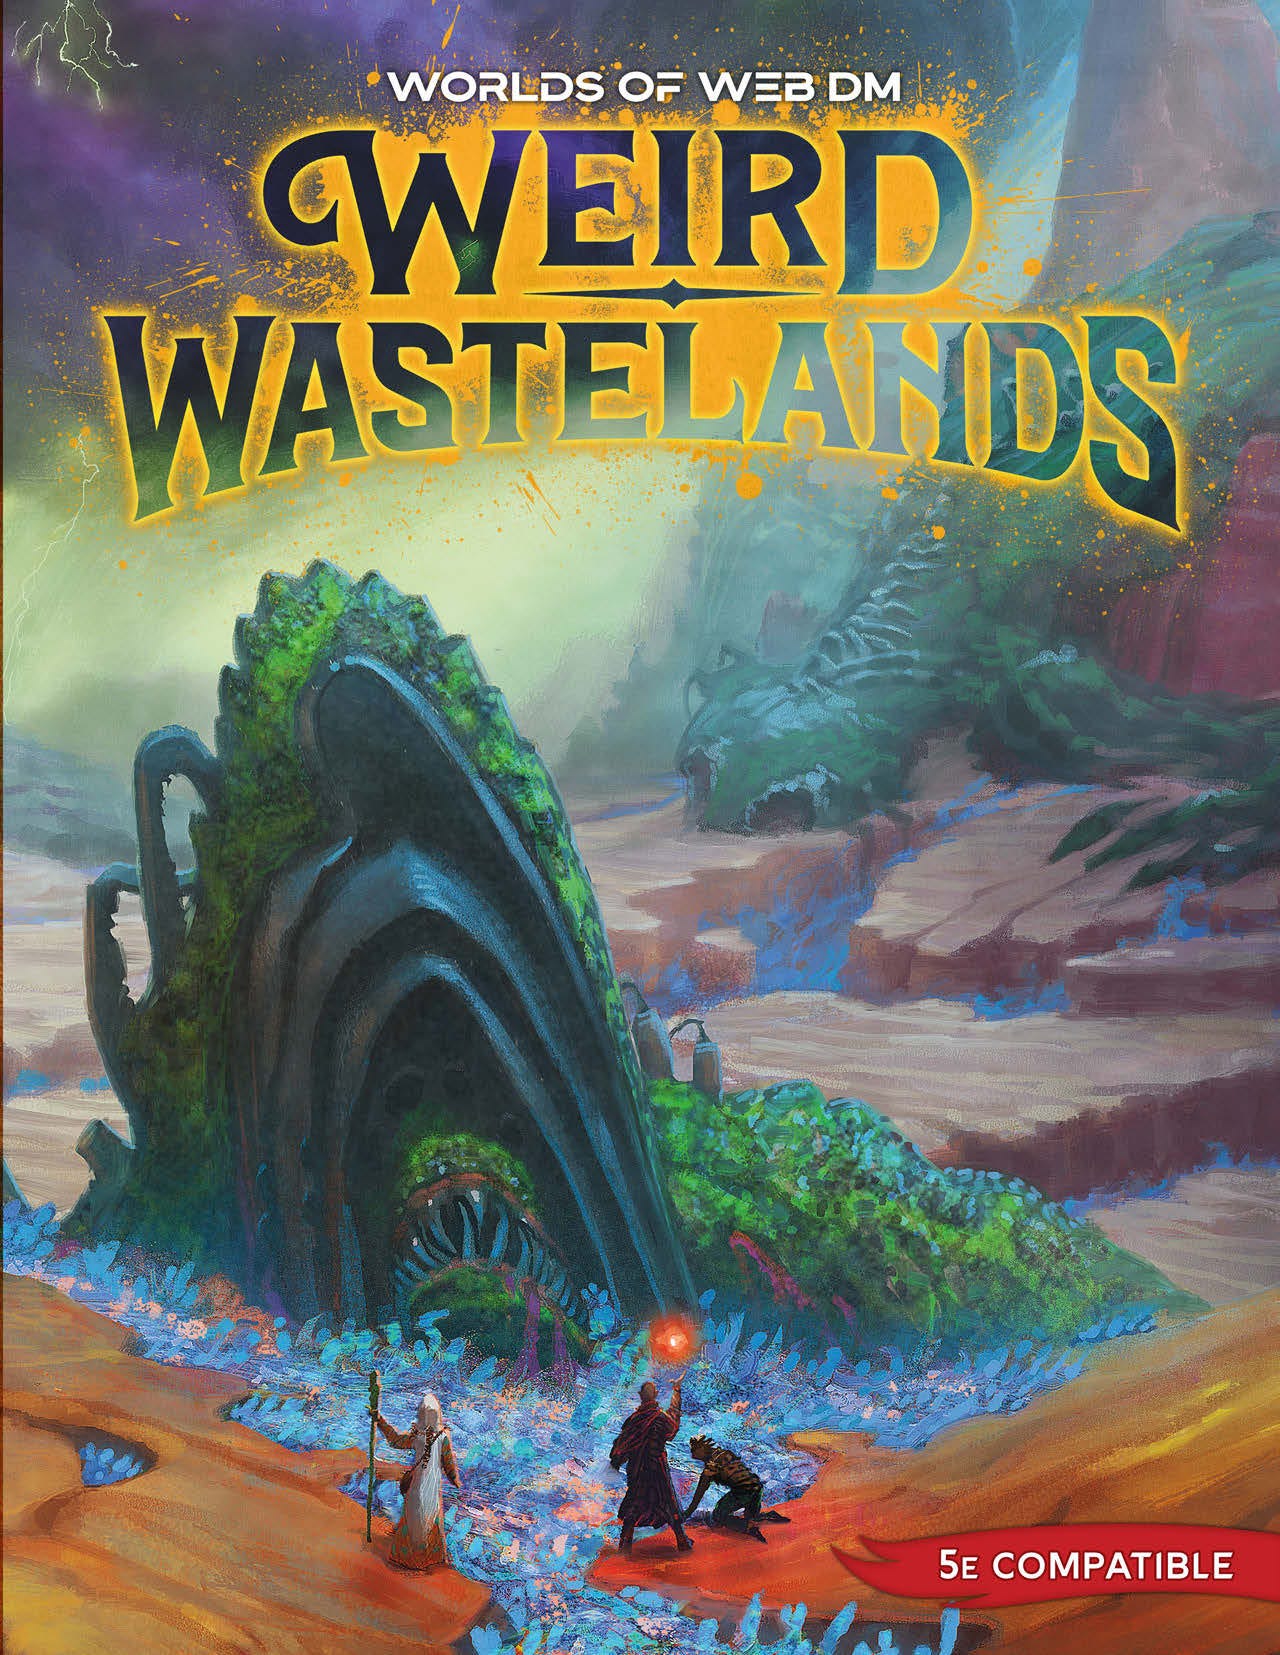 The cover for Worlds of Web DM: Weird Wastelands